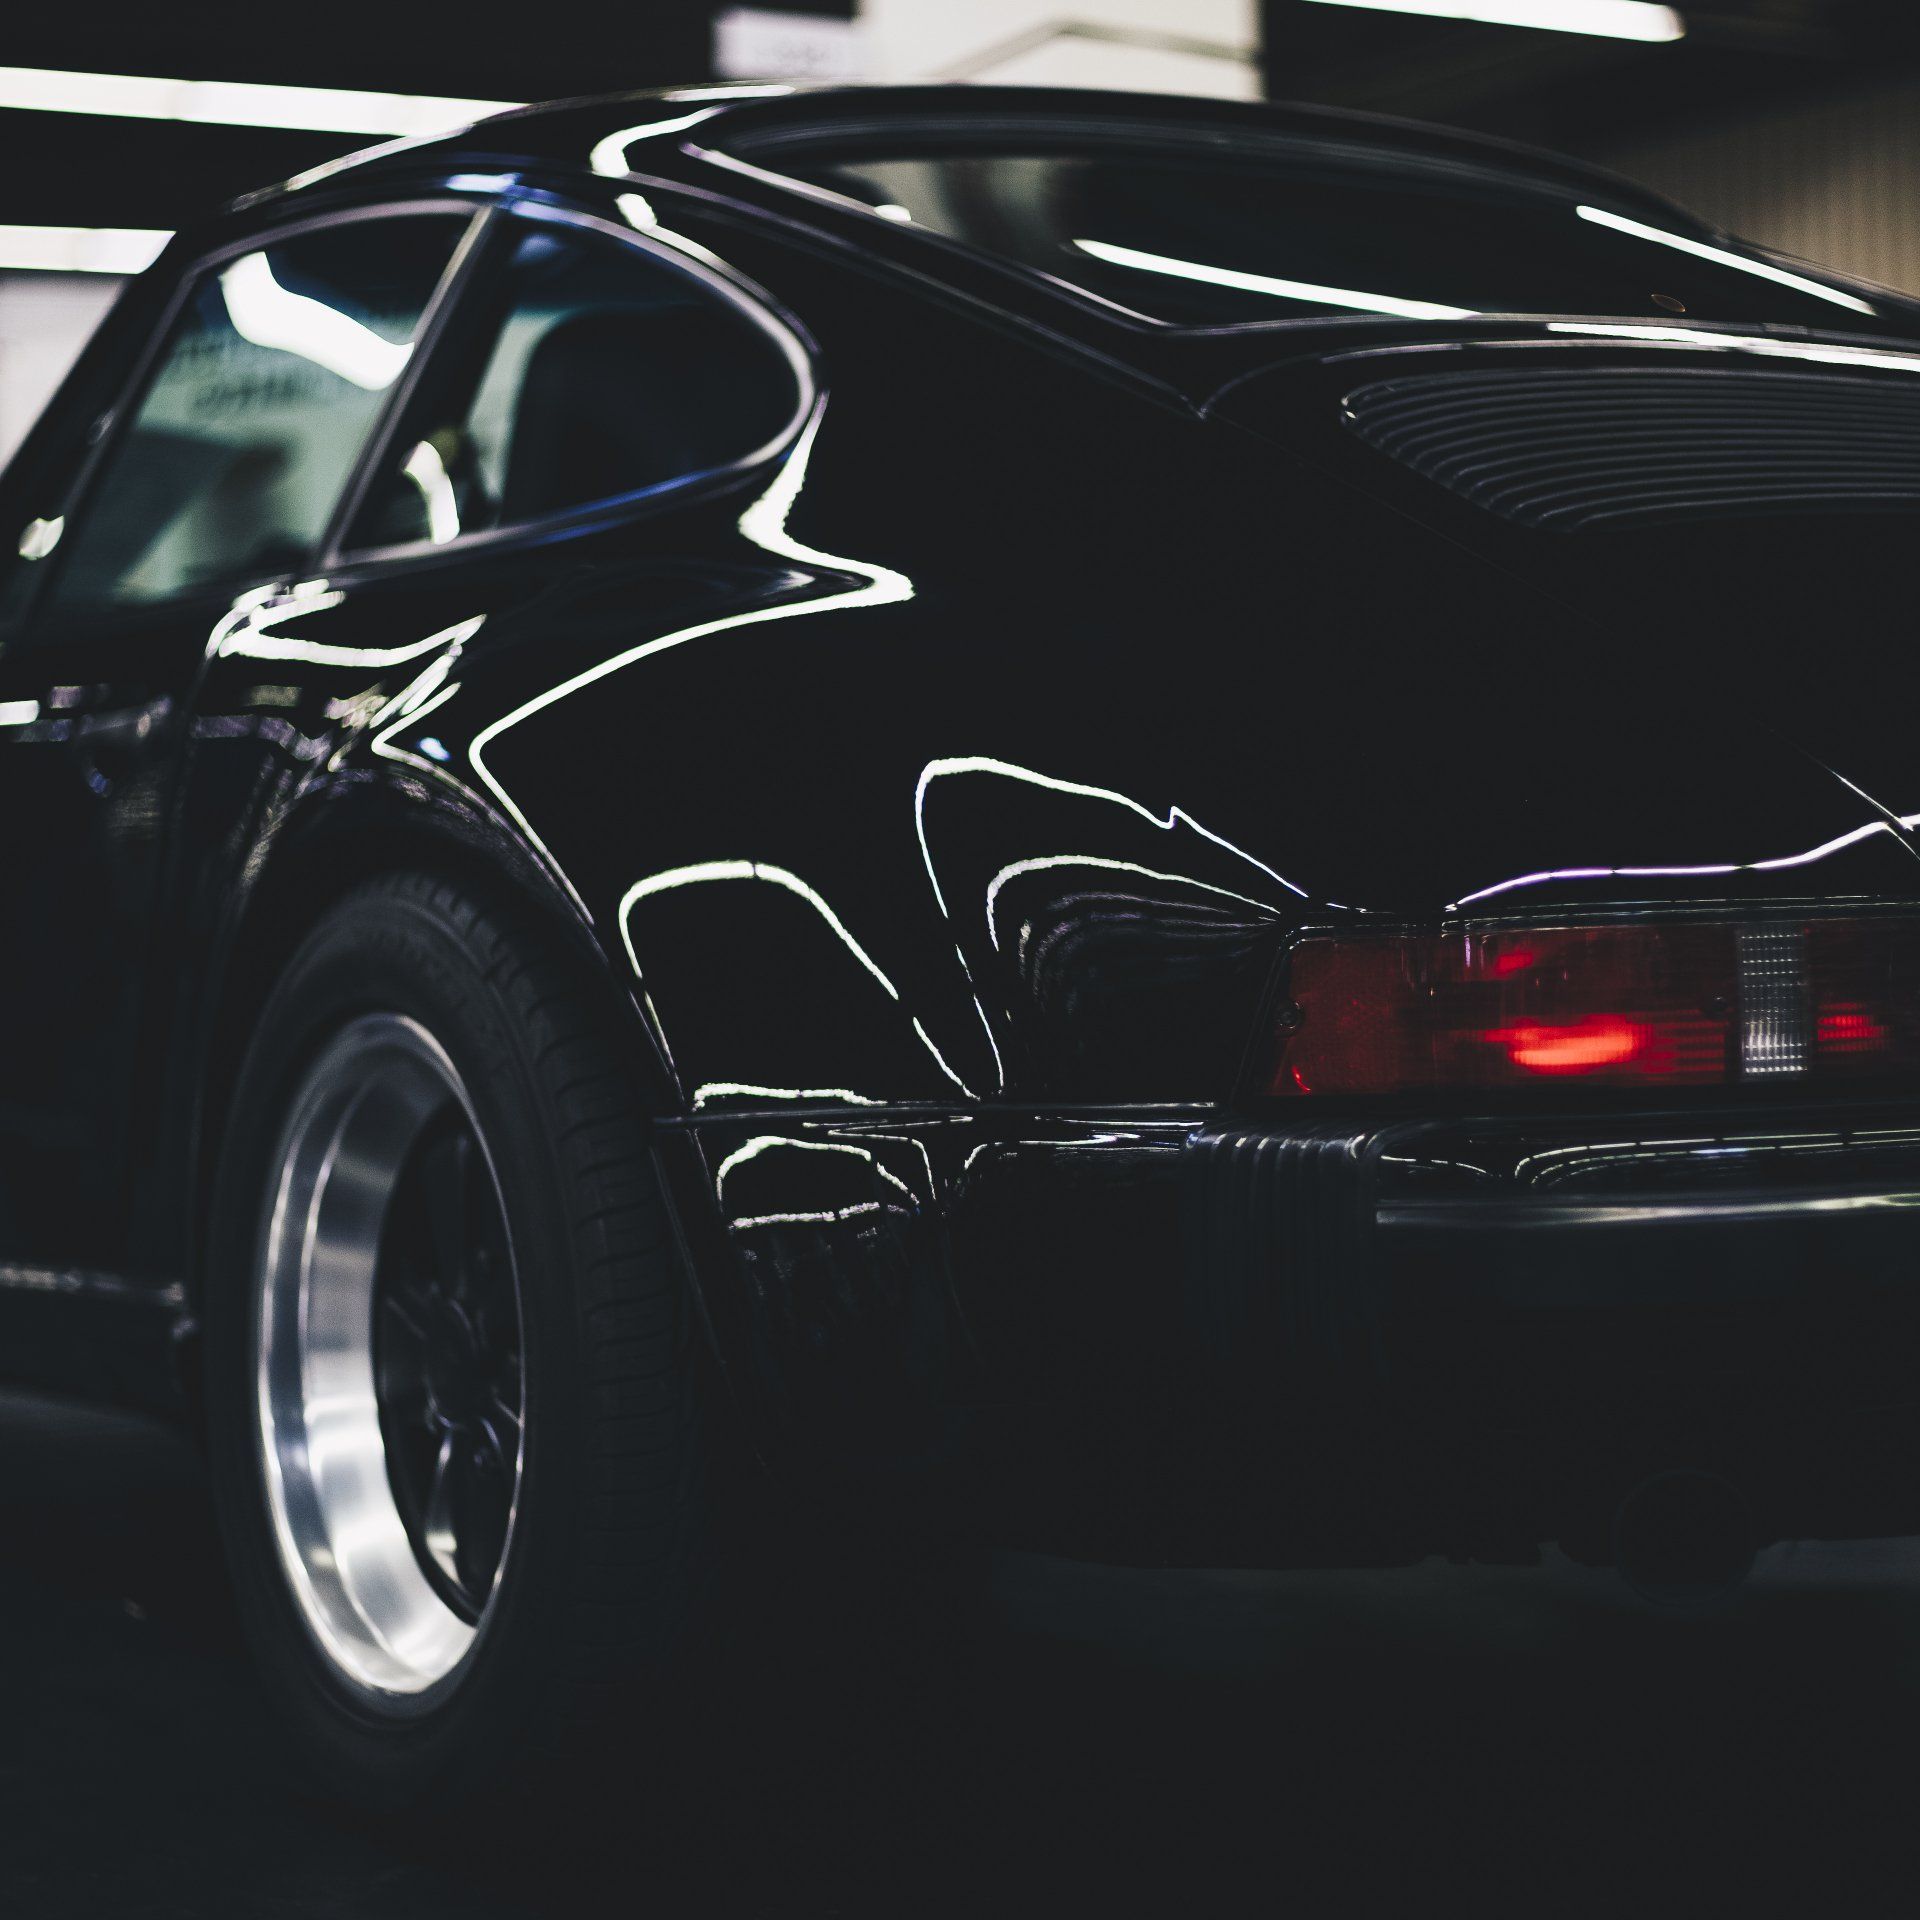 Gleaming black car reflecting brilliance, polished to perfection.